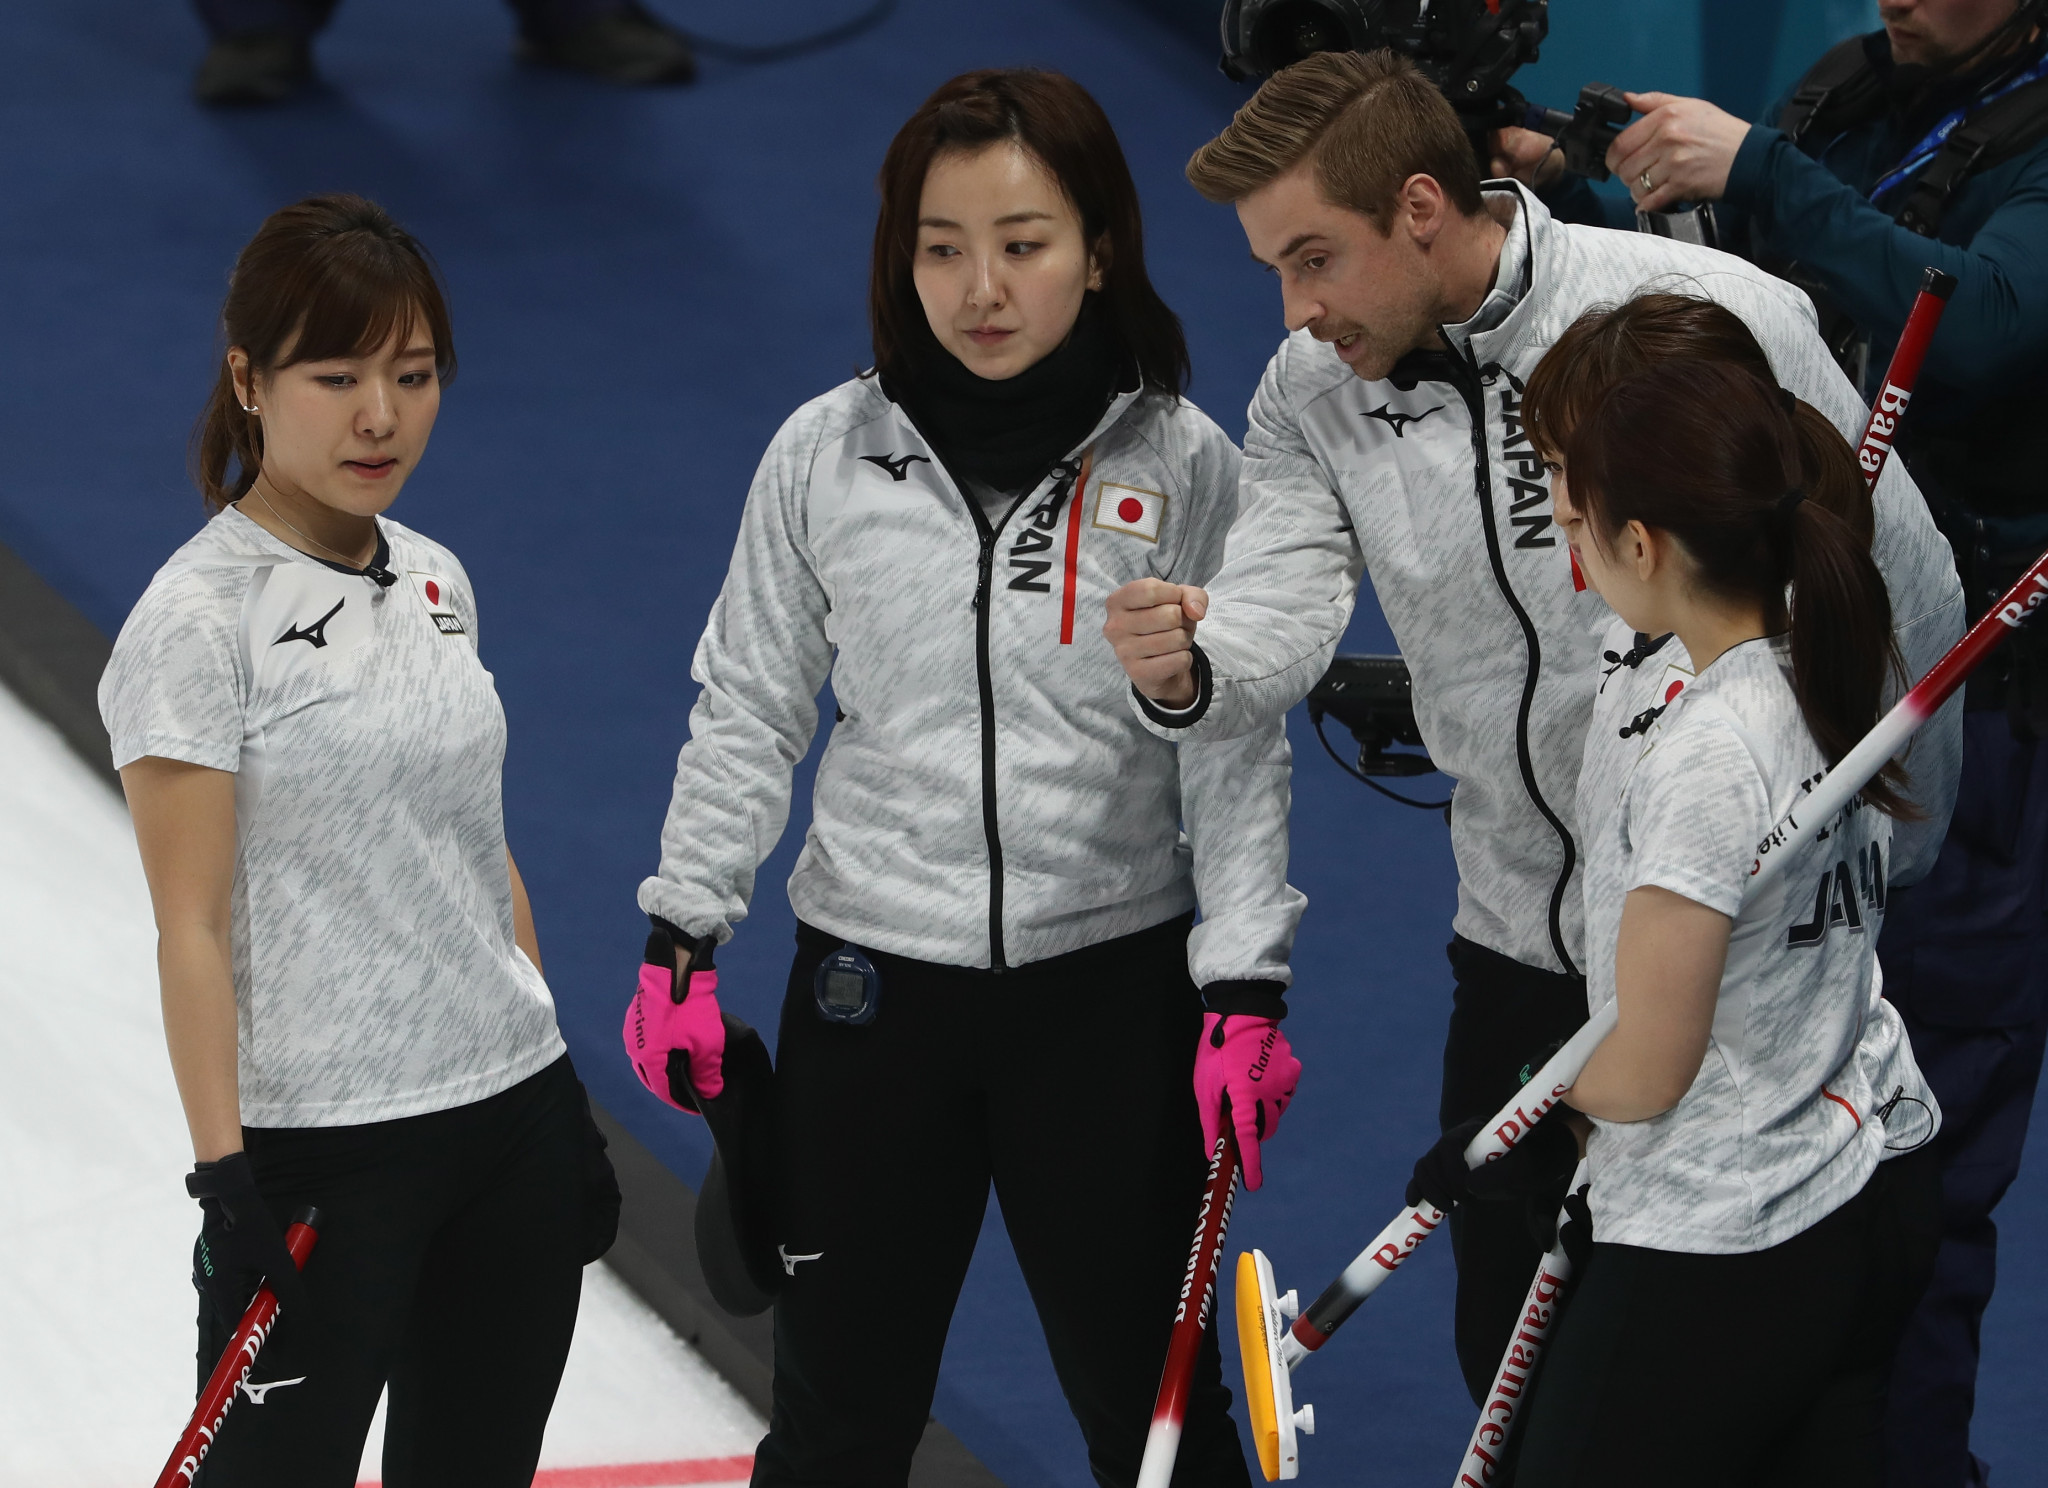 Lind departs Japan after leading women's curling team to Olympic silver medal